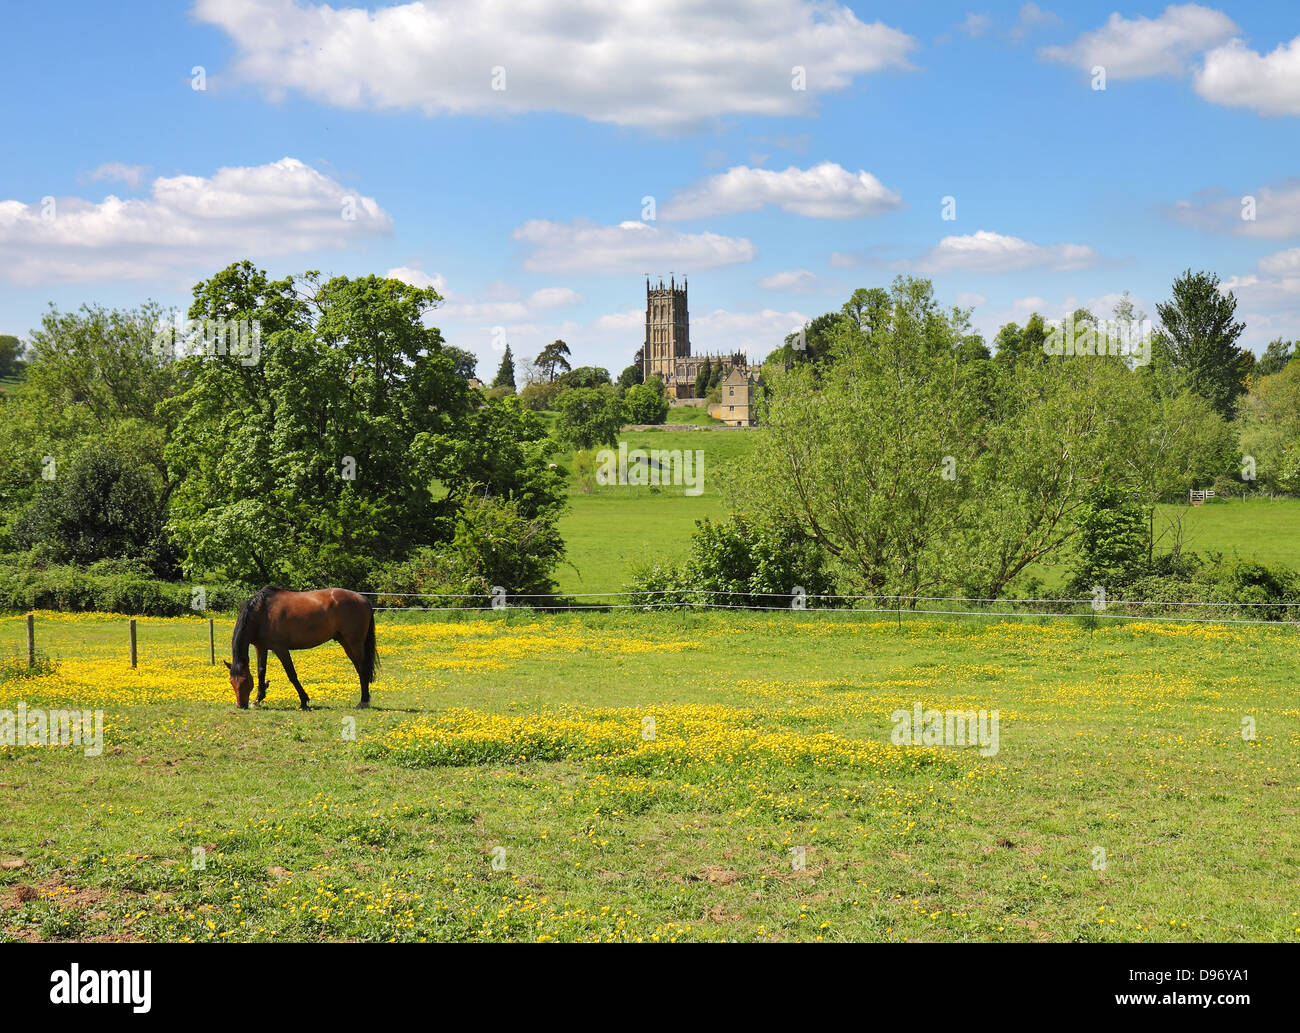 An English Summer Landscape in the Cotswold Hills with Horse and church Stock Photo